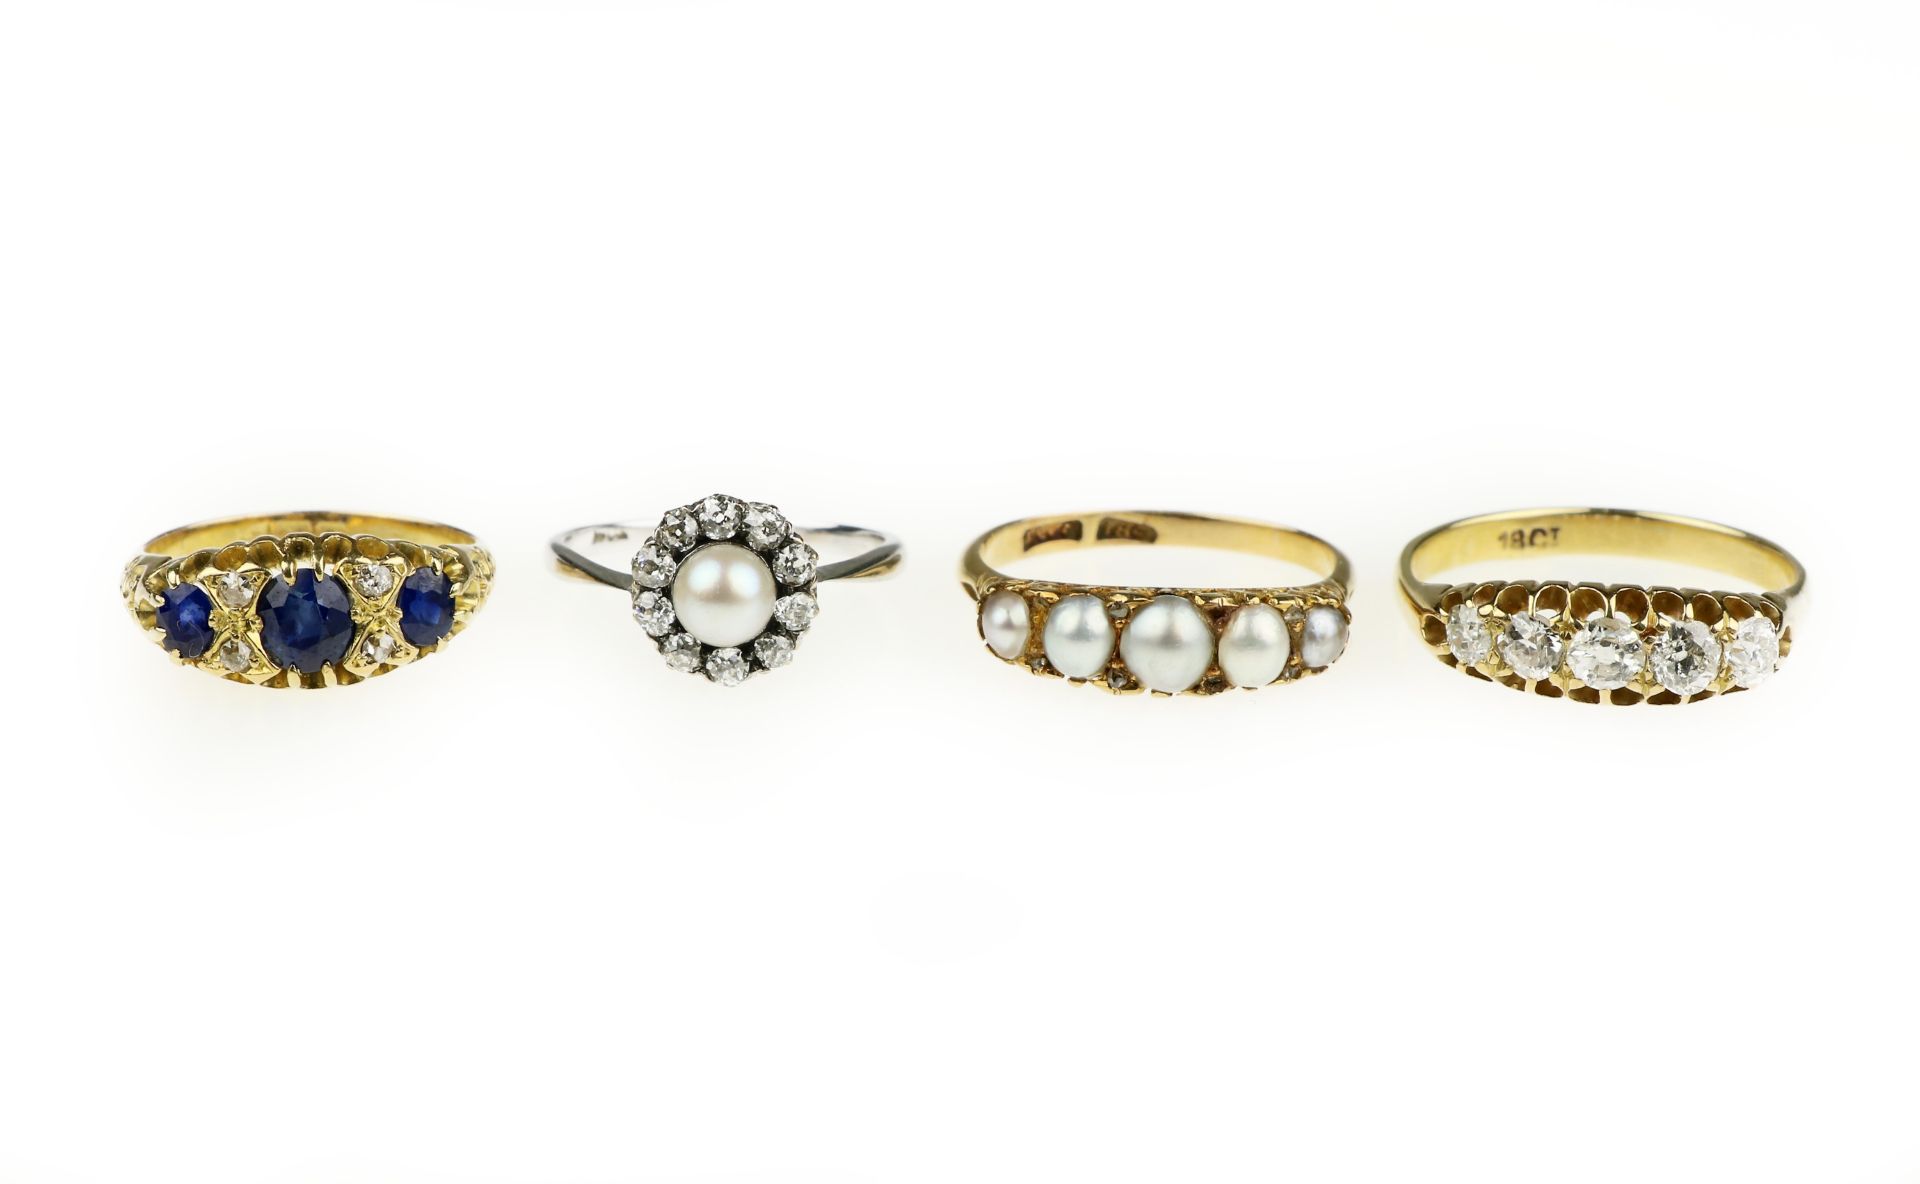 A collection of four gem-set and diamond rings